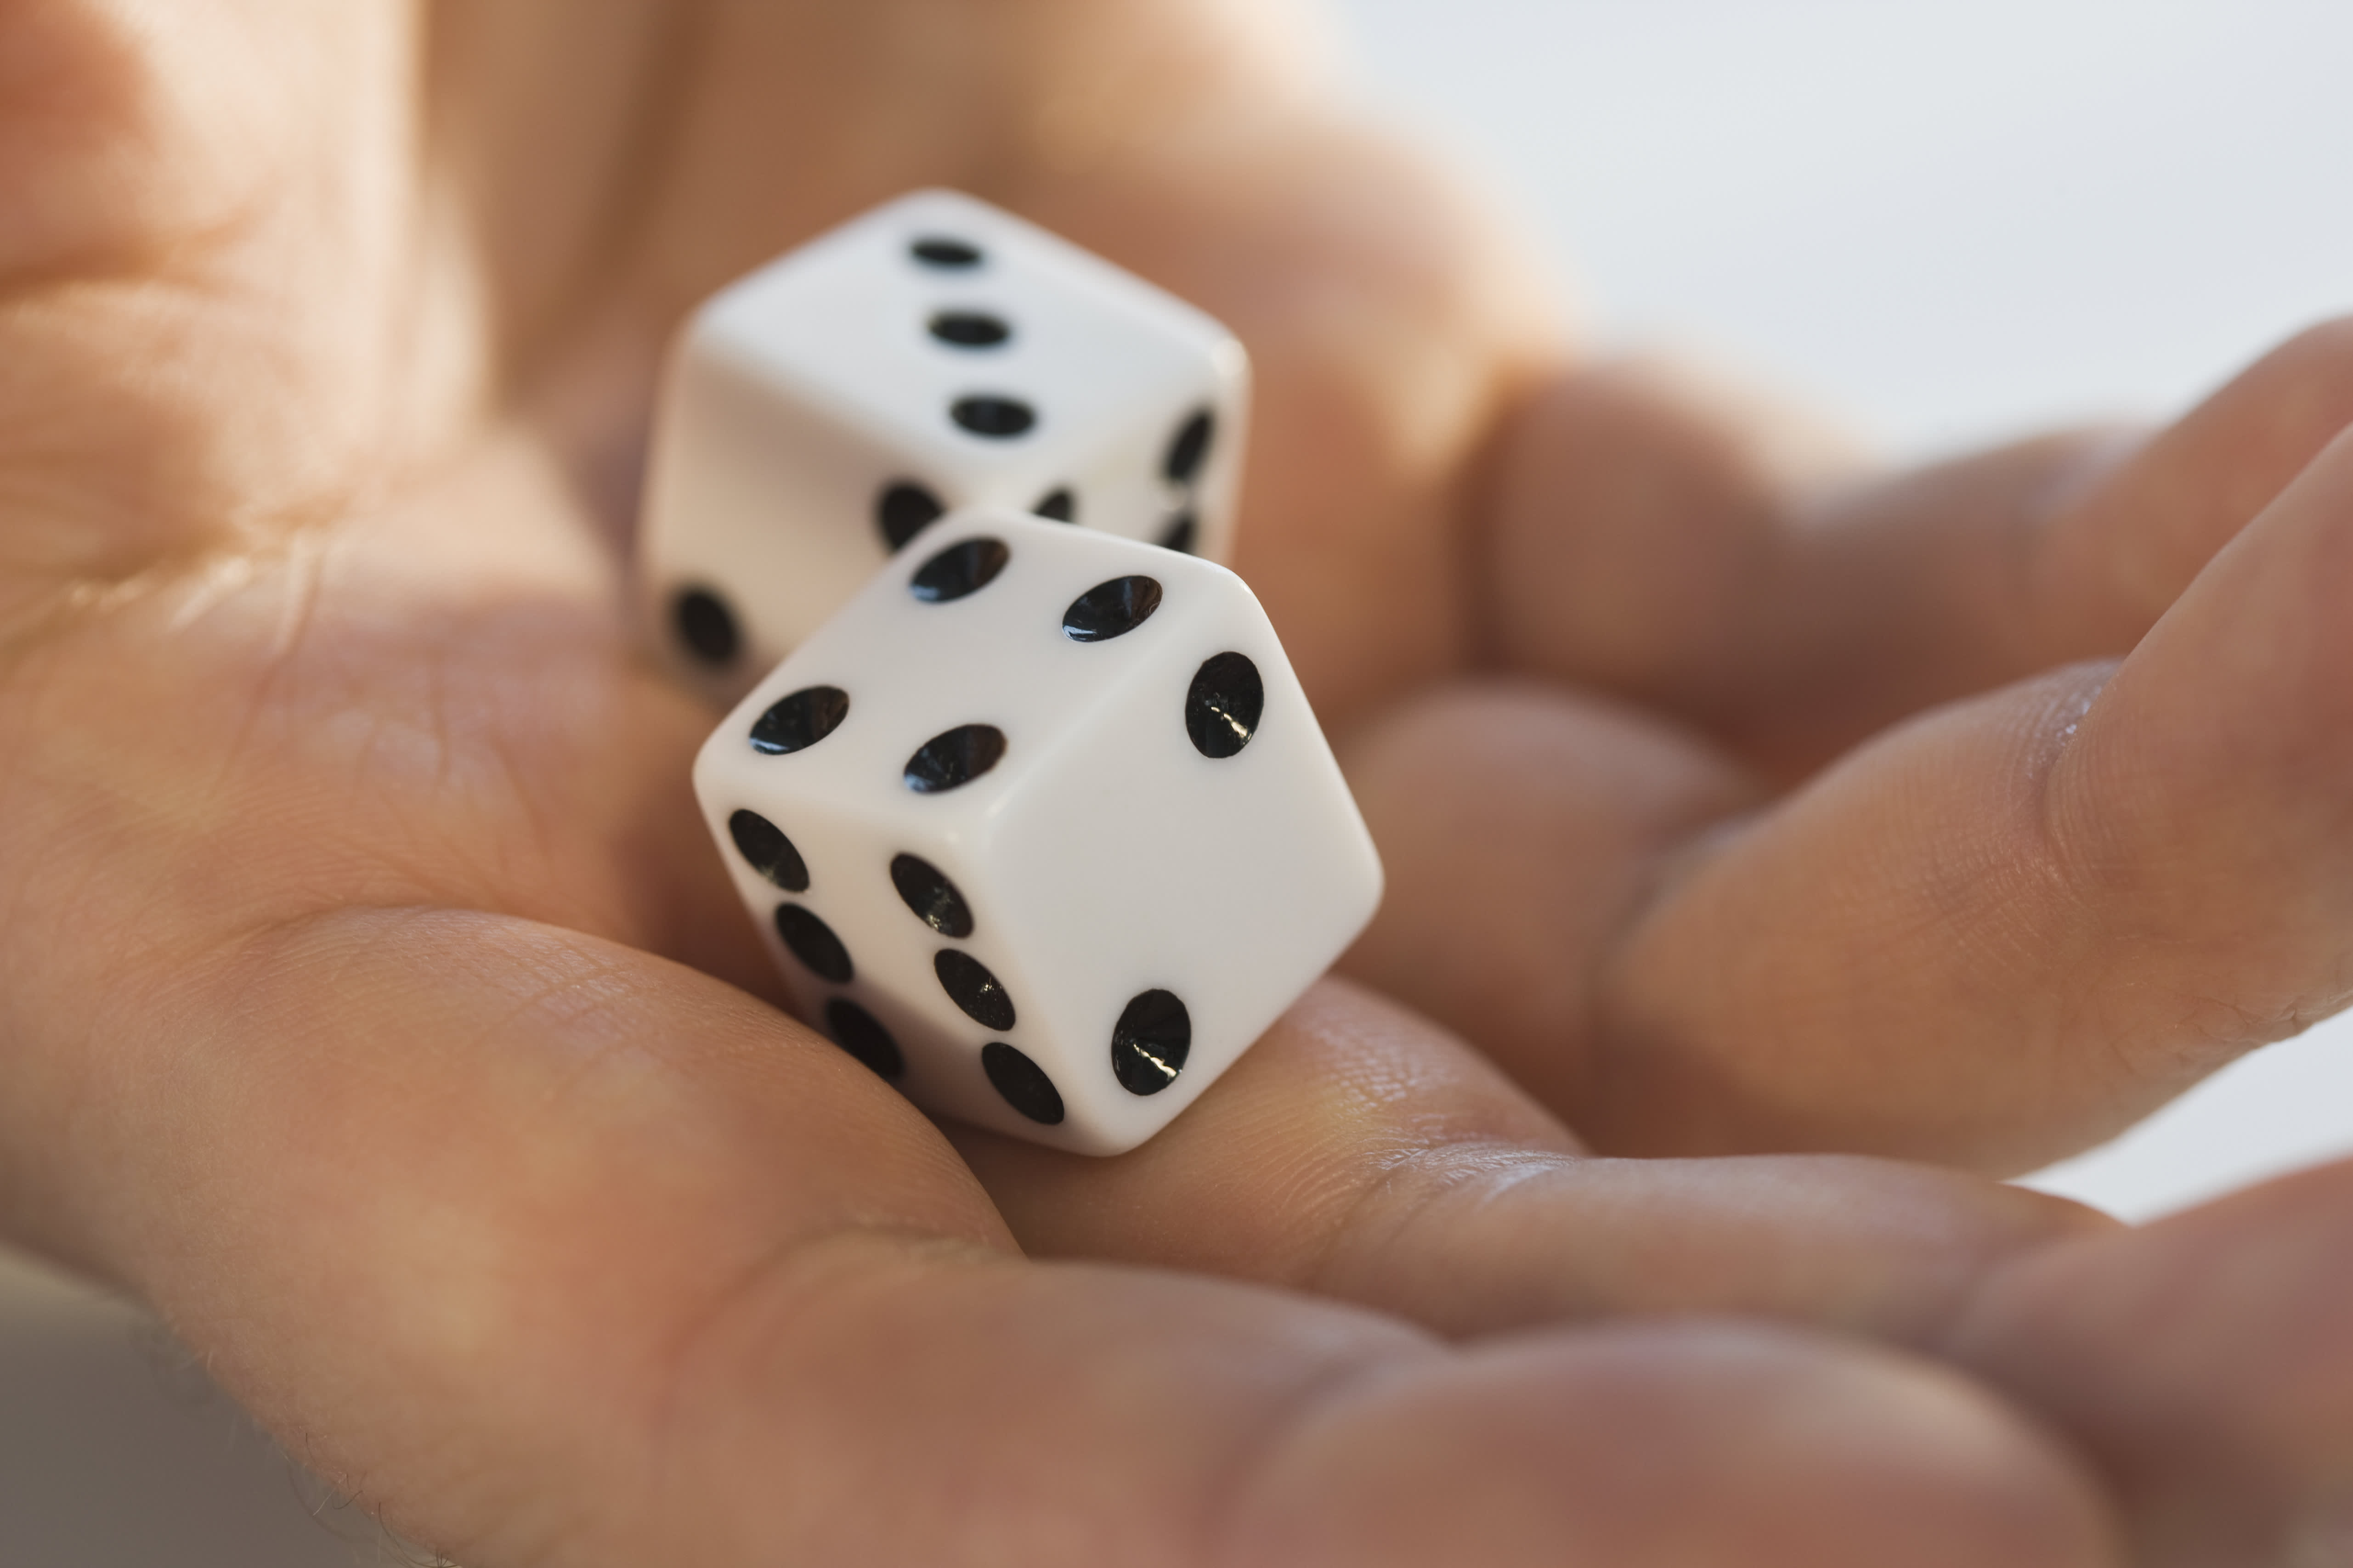 What is the probability of rolling doubles on a pair of dice